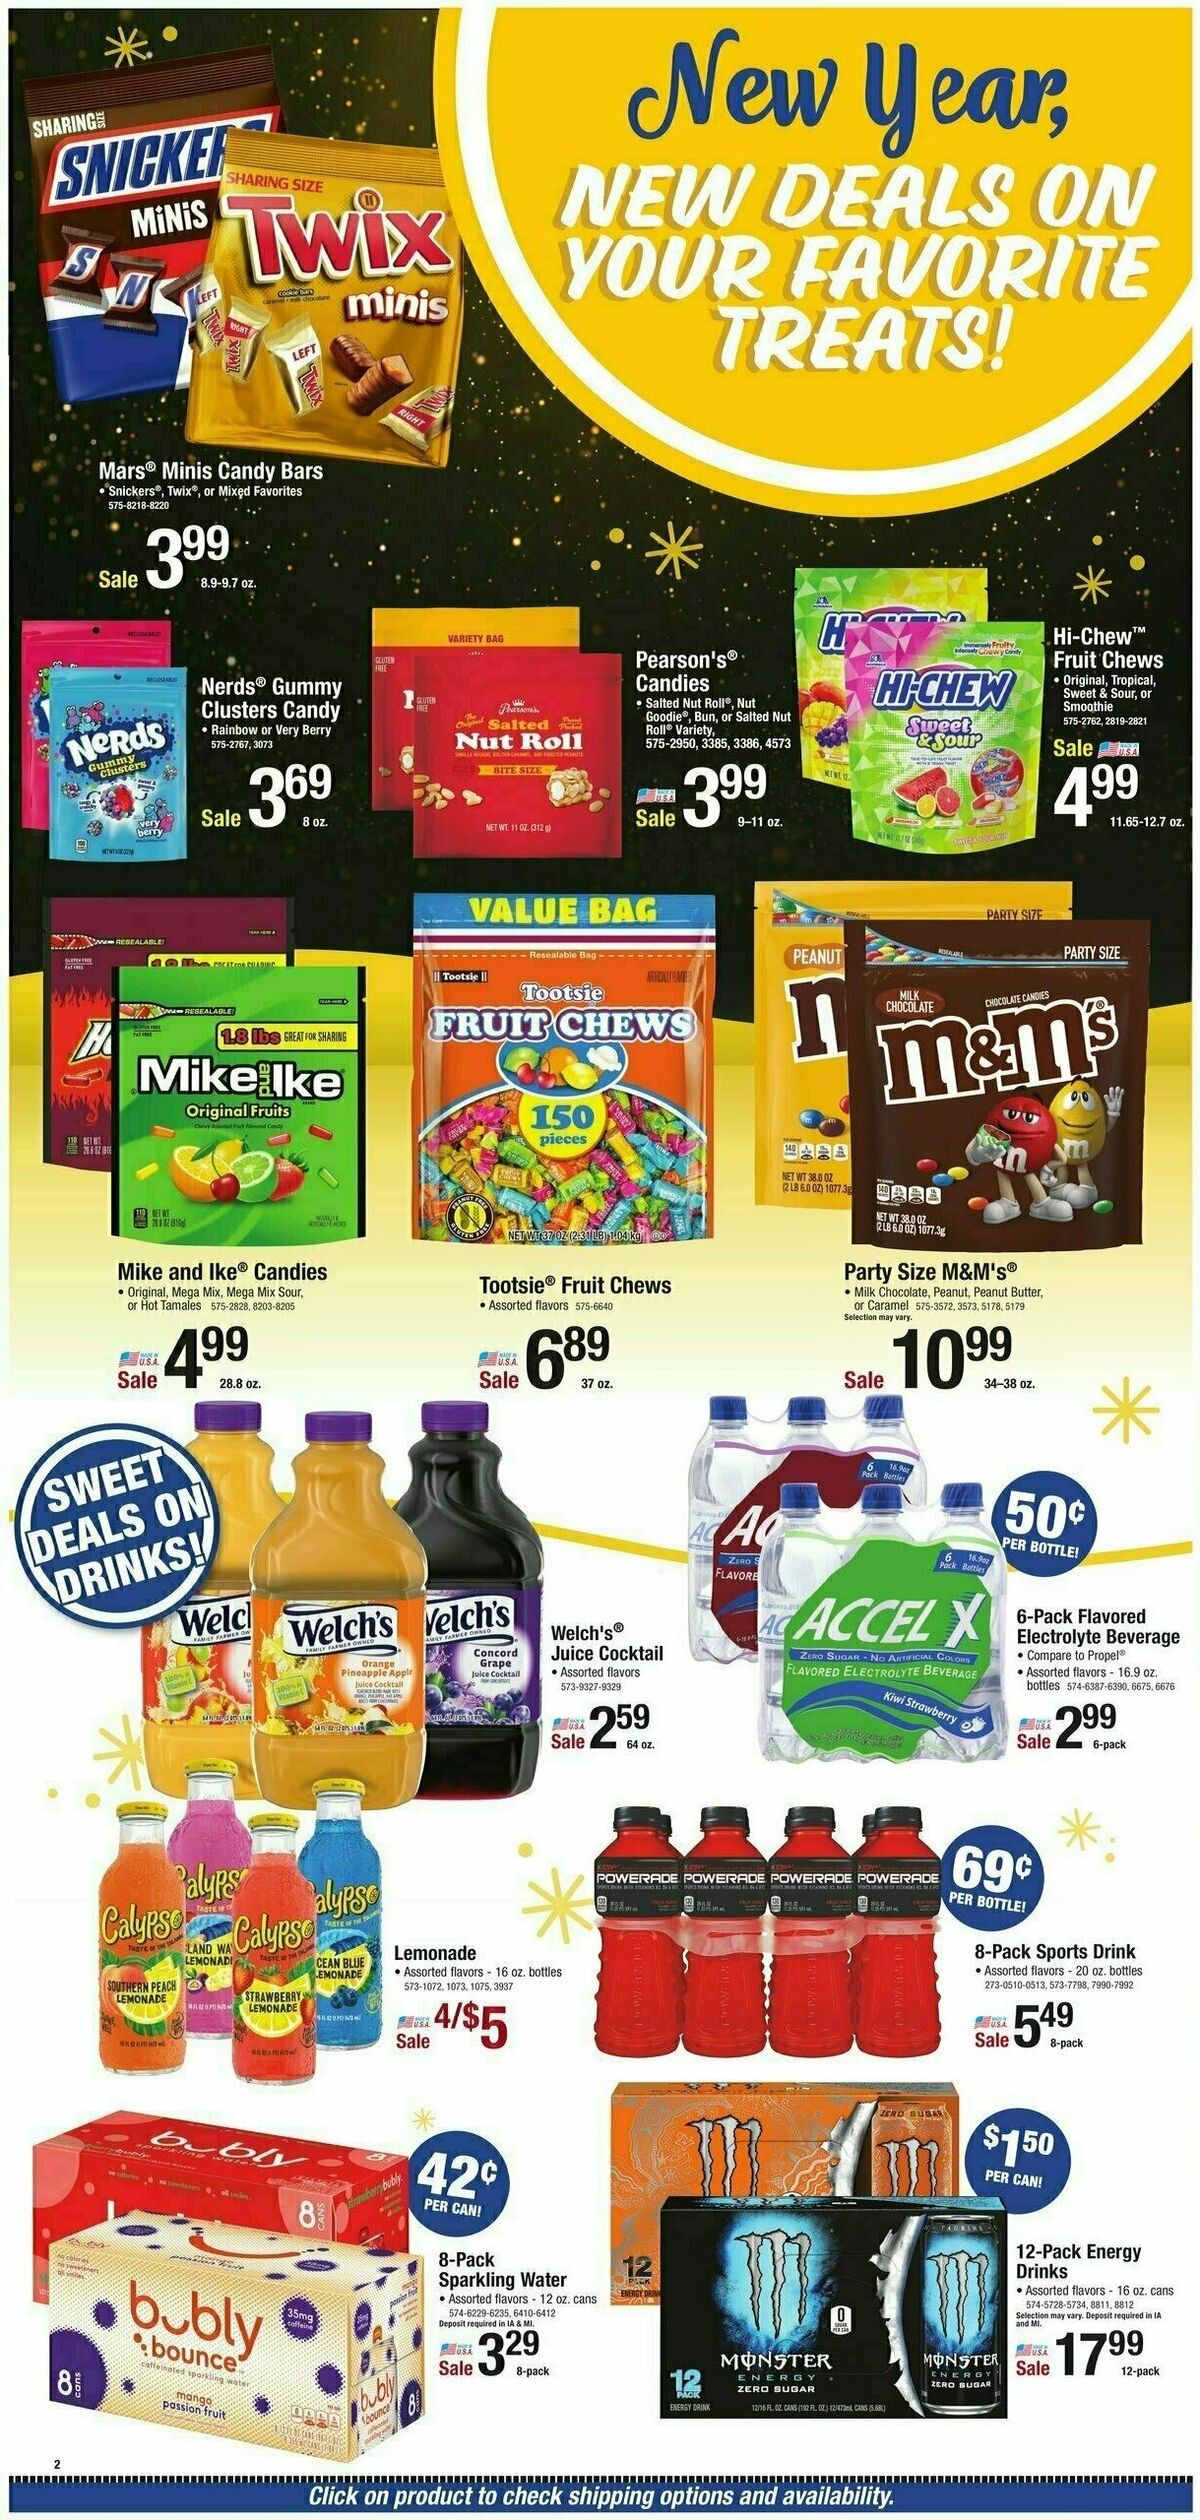 Menards Home Essentials Weekly Ad from December 26